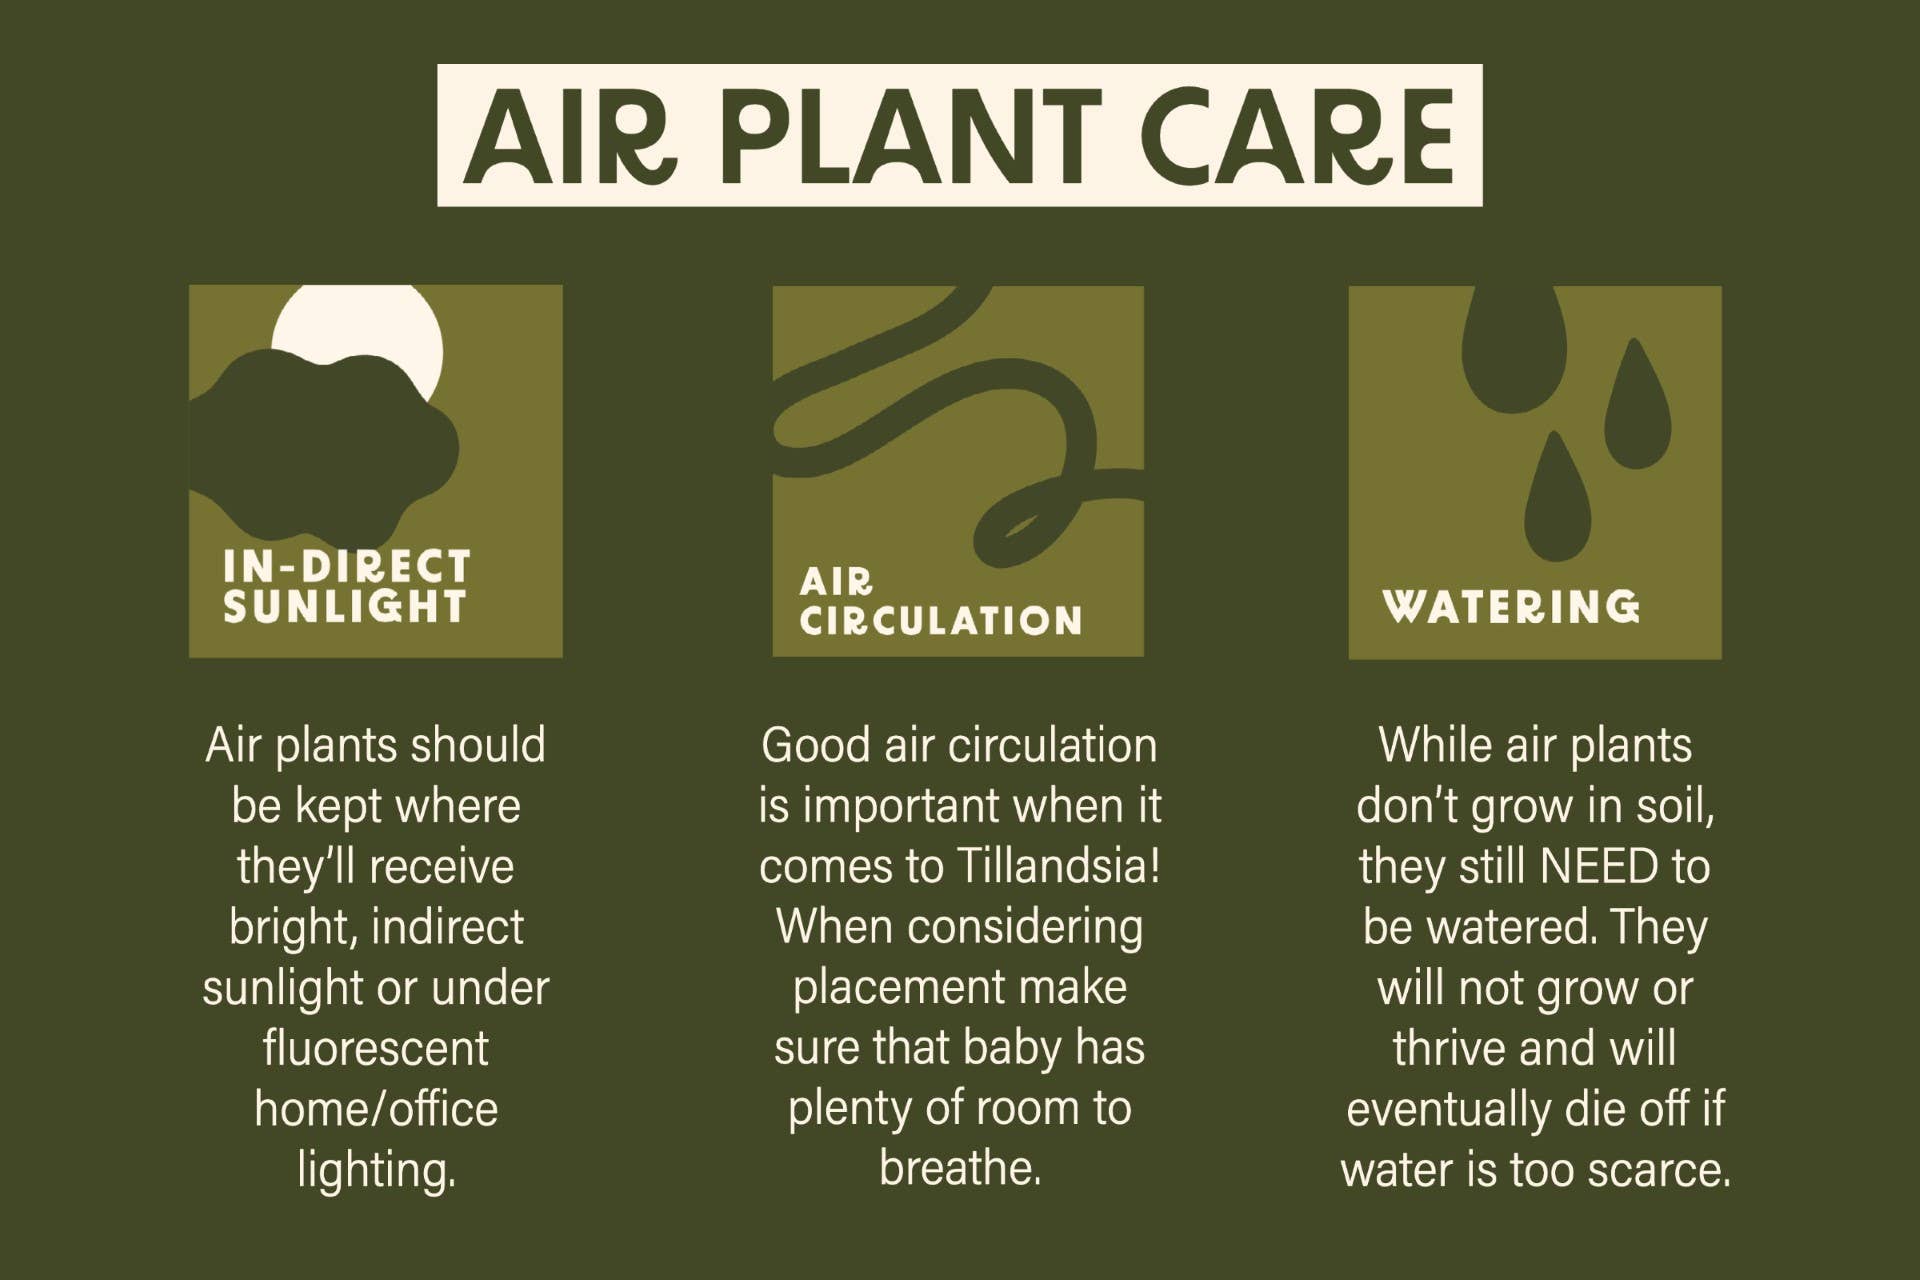 Infographic on abdita air plant care and photosynthesis in different environmental climates.